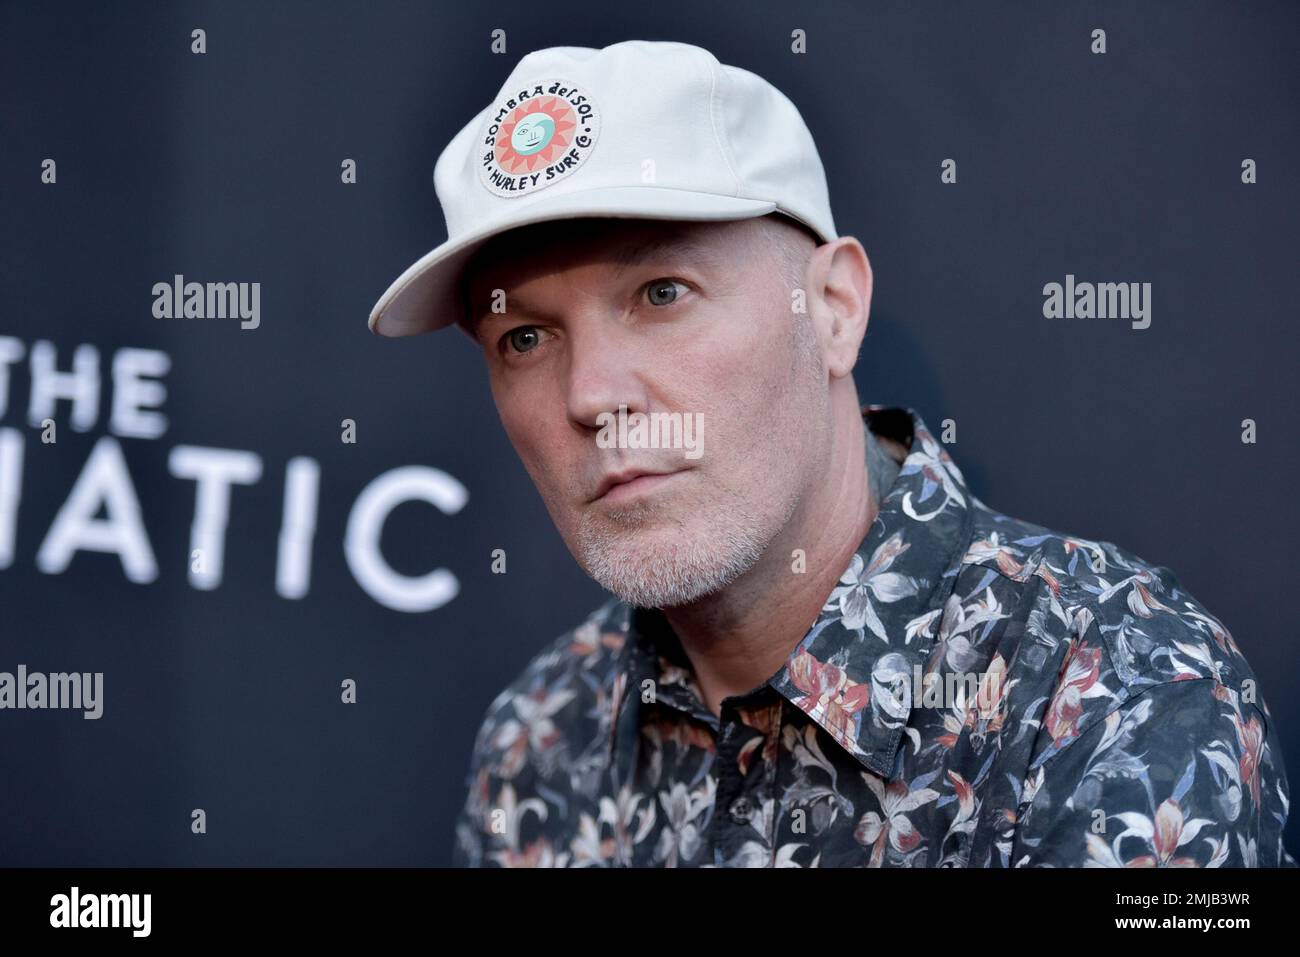 Fred Durst attends the LA premiere of "The Fanatic" at the Egyptian Theatre on Thursday, Aug. 22, 2019, in Los Angeles. (Photo by Richard Shotwell/Invision/AP) Stock Photo